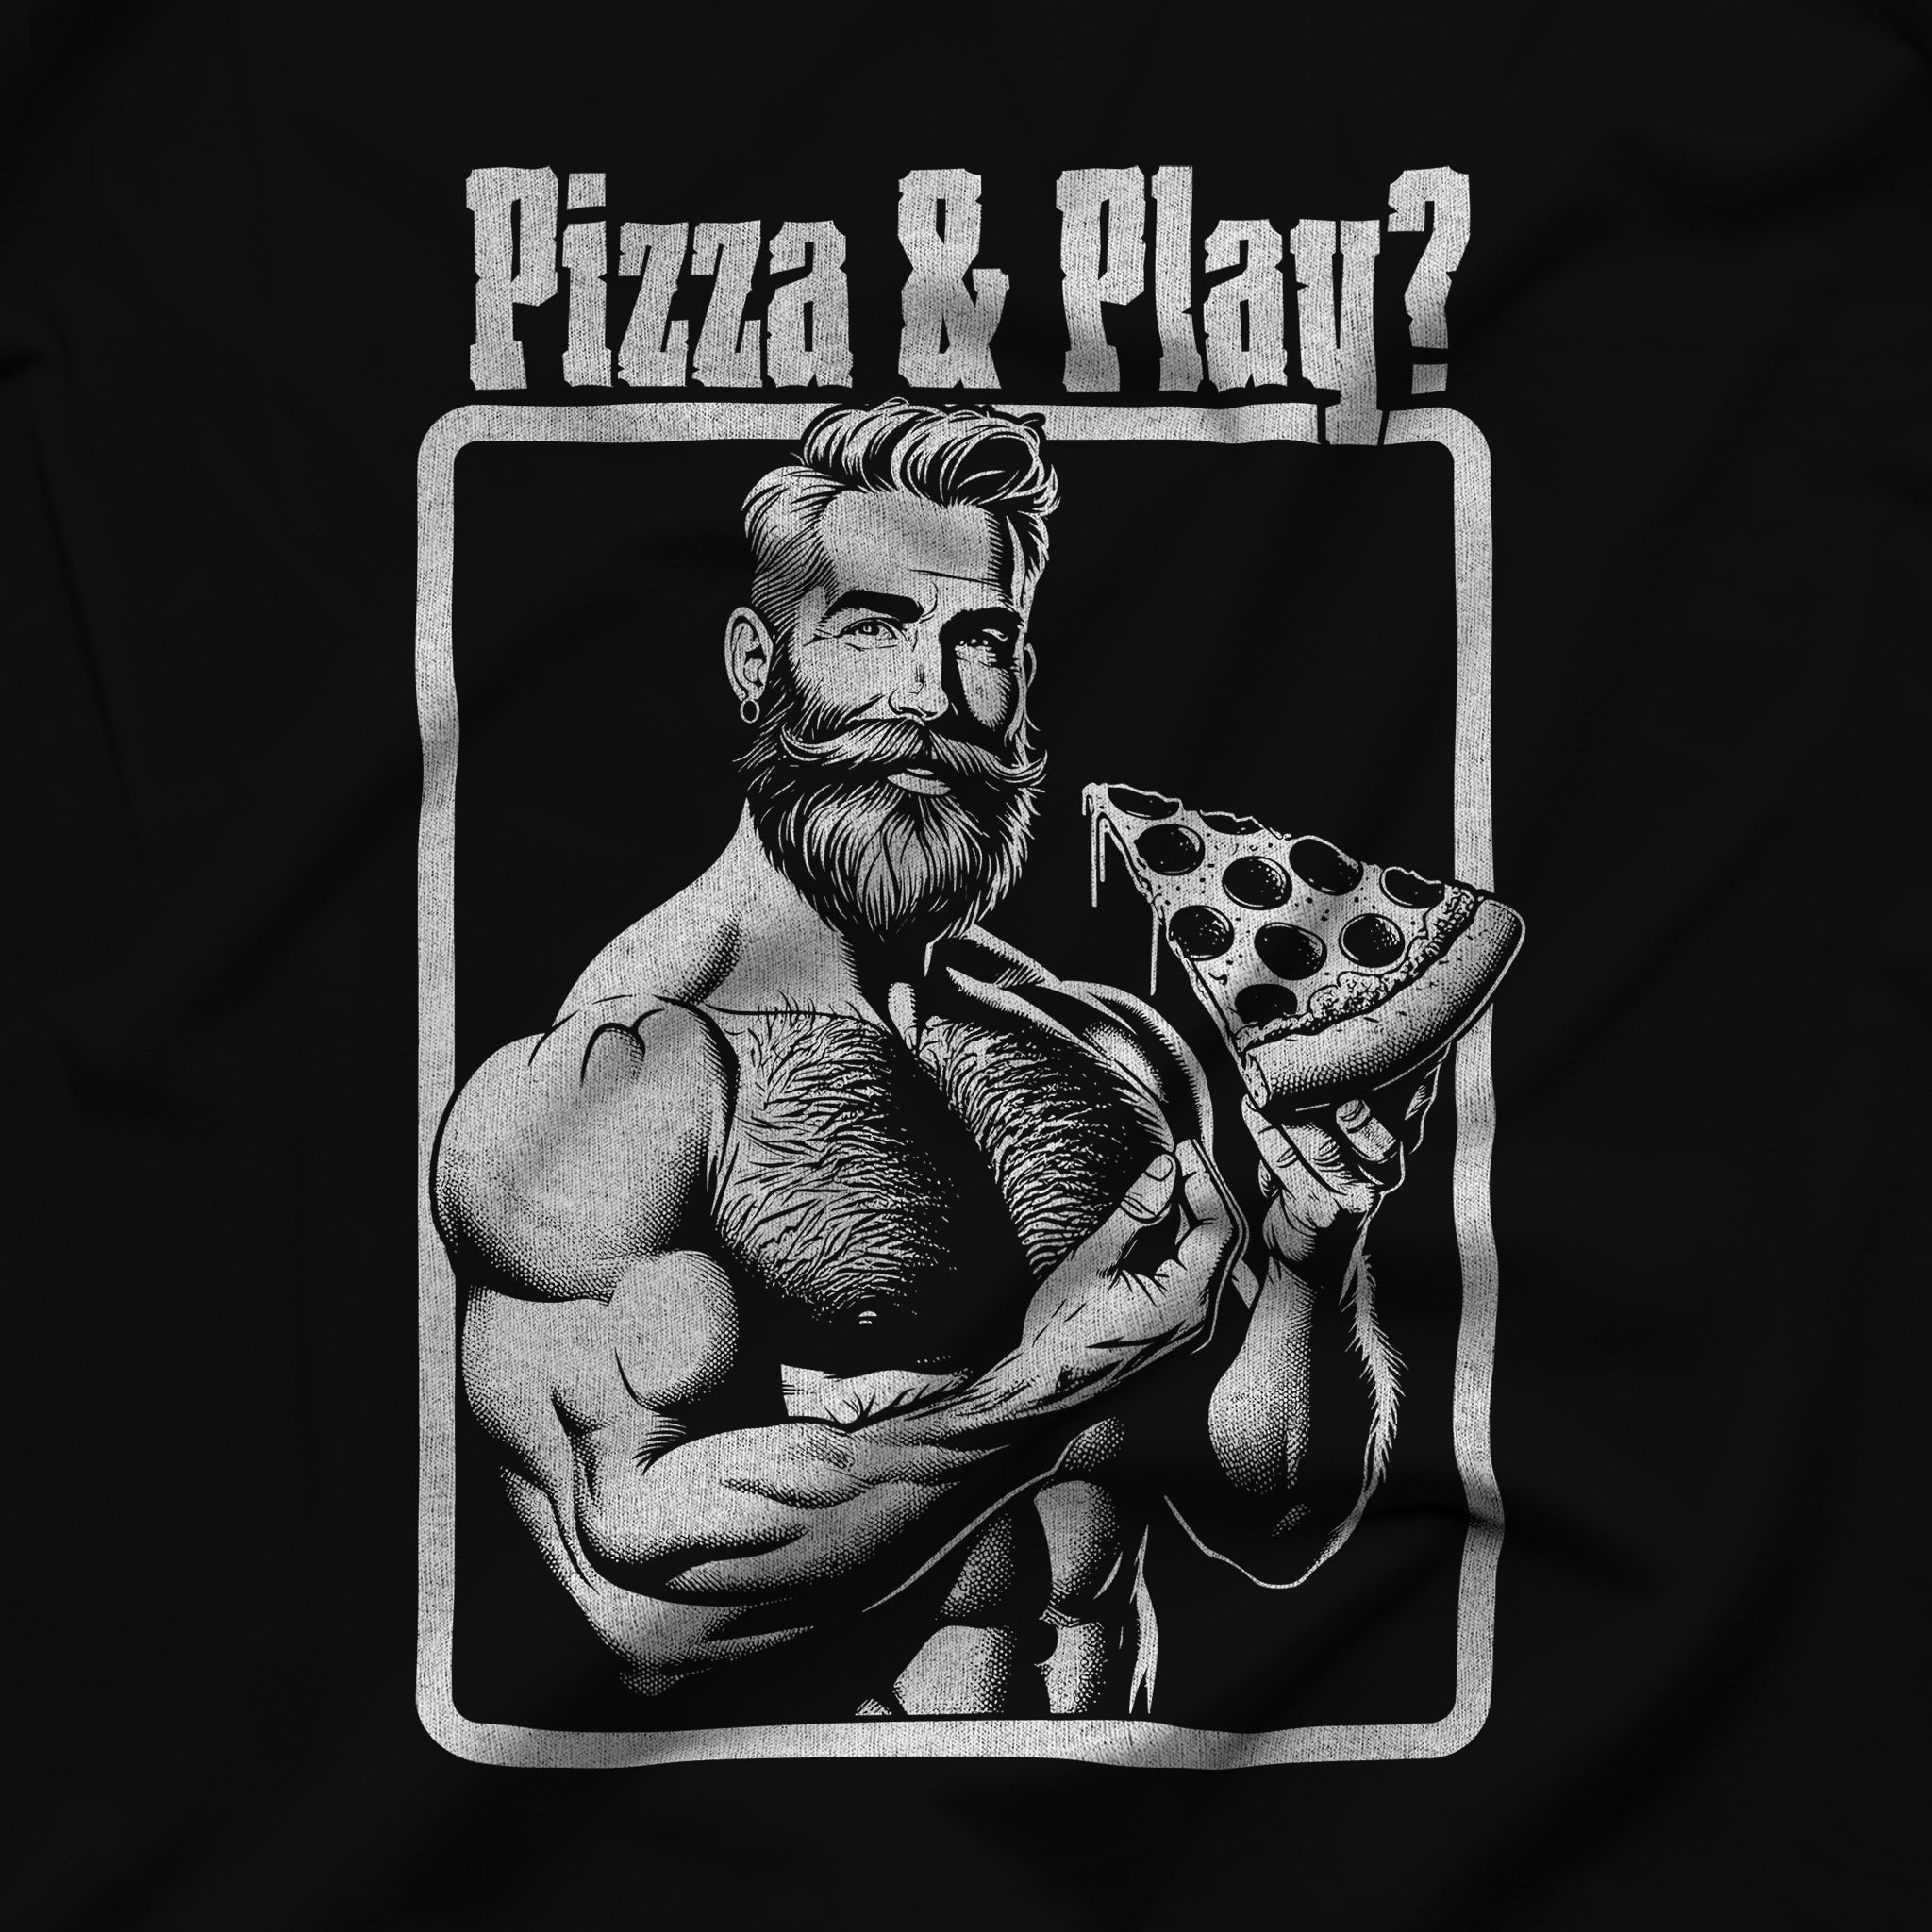 Pizza & Play Muscle Tee – Slice of Seduction - Hunky Tops